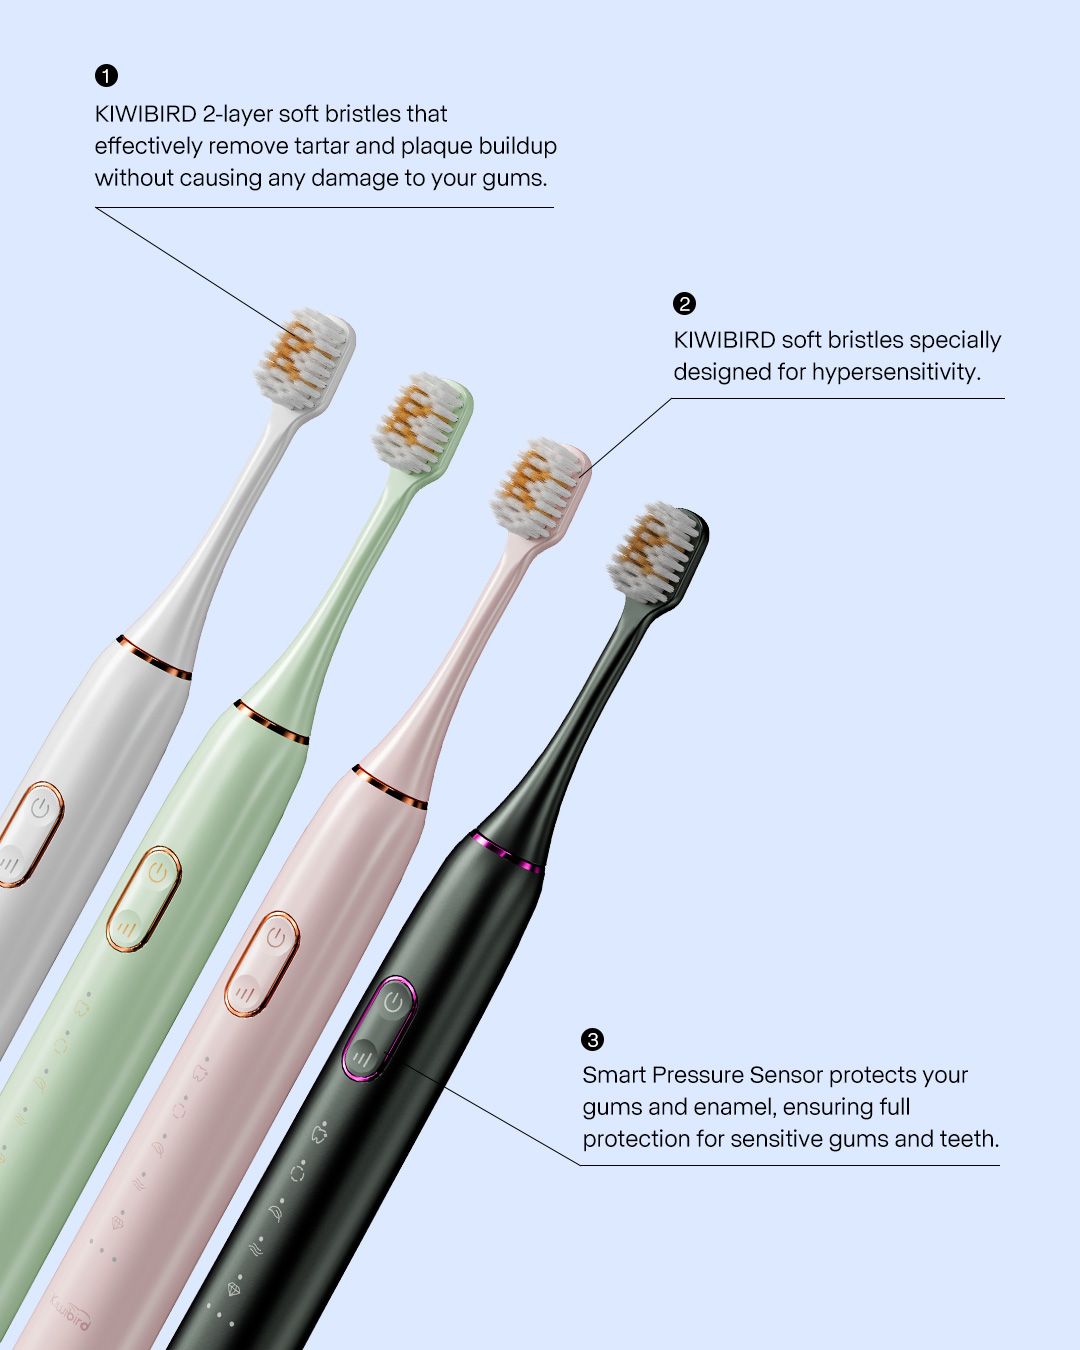 Precision in Dental Care: The Kiwibird Electric Toothbrush with Pressure Sensor